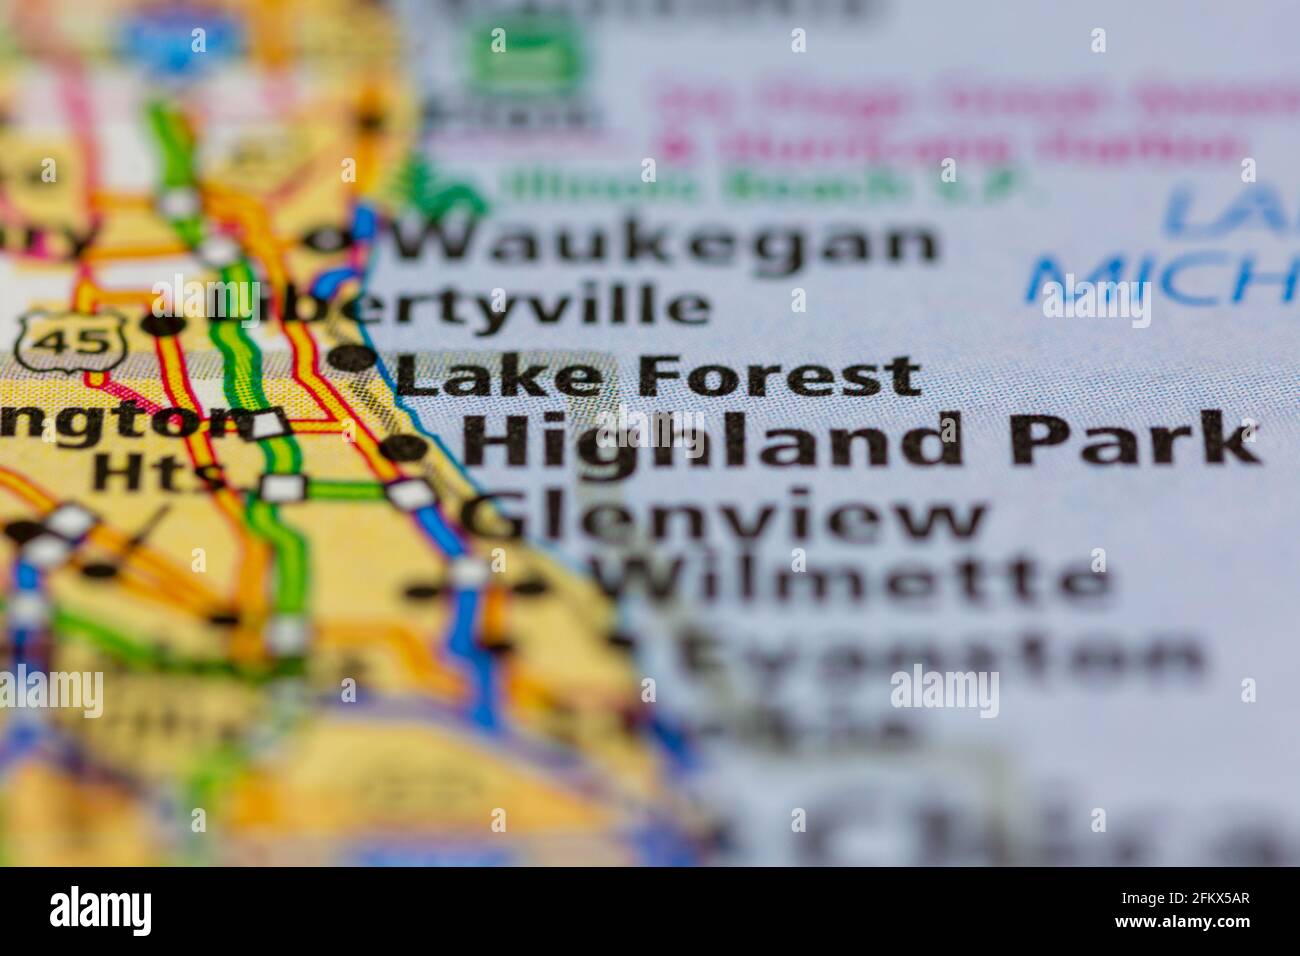 Lake Forest Illinois Shown on a Geography map or road map Stock Photo